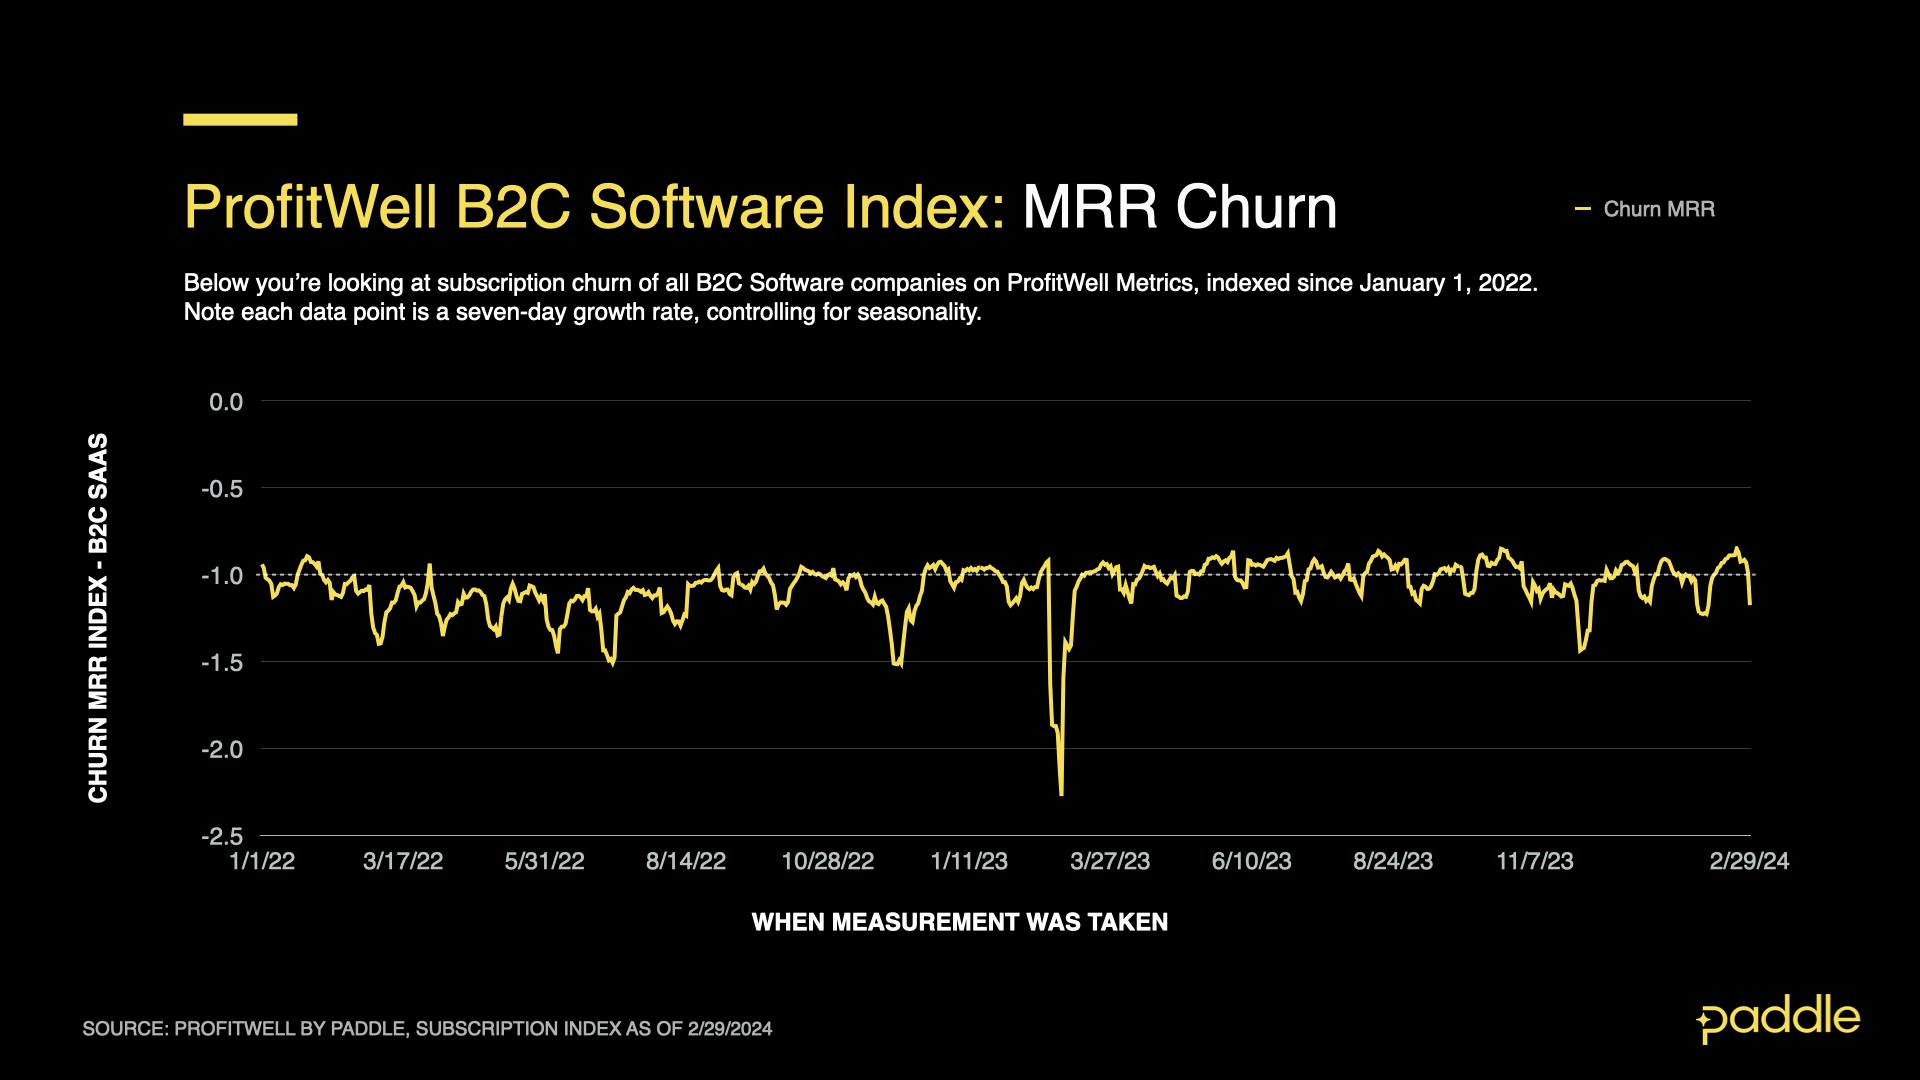 ProfitWell B2C Index showing MRR churn performing slightly better